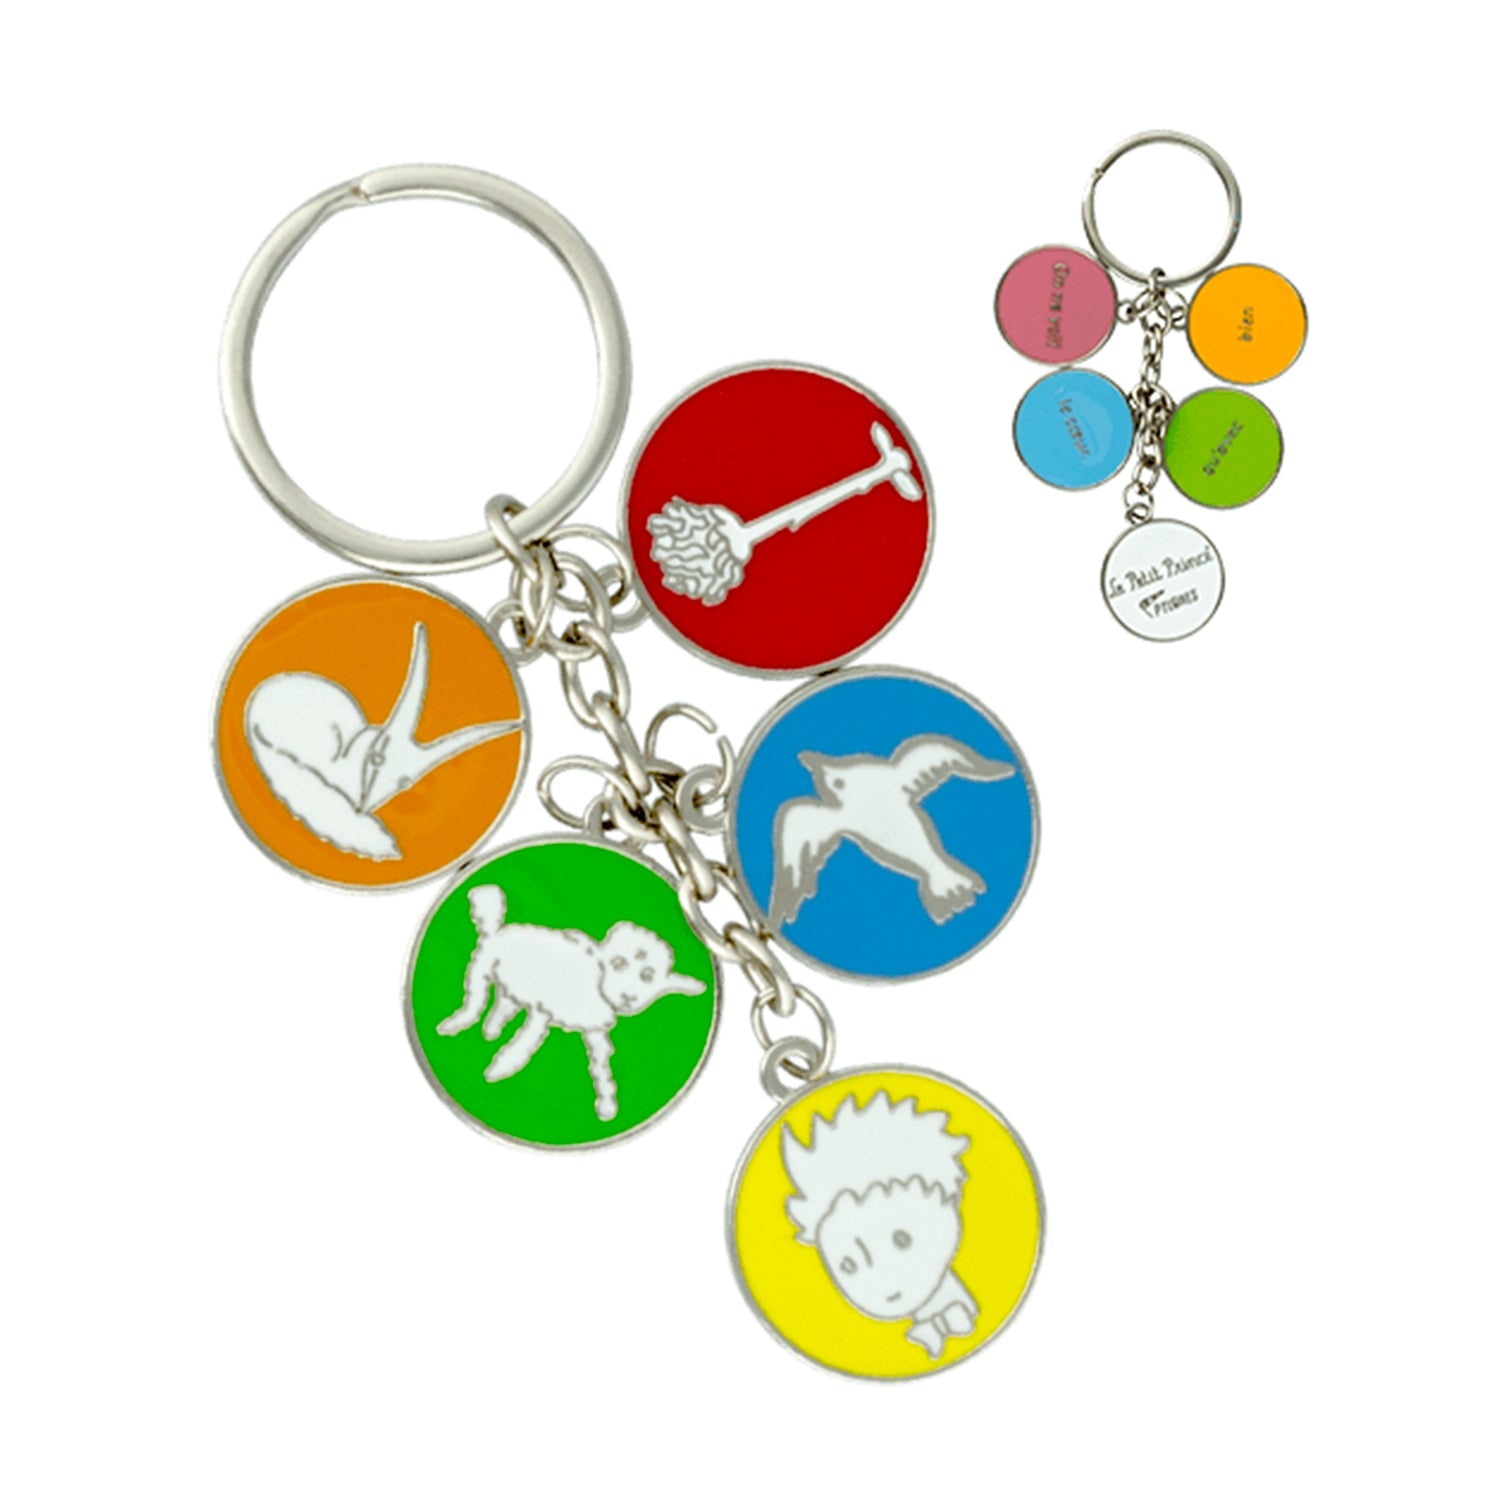 THE LITTLE PRINCE CIRCLES KEYCHAIN